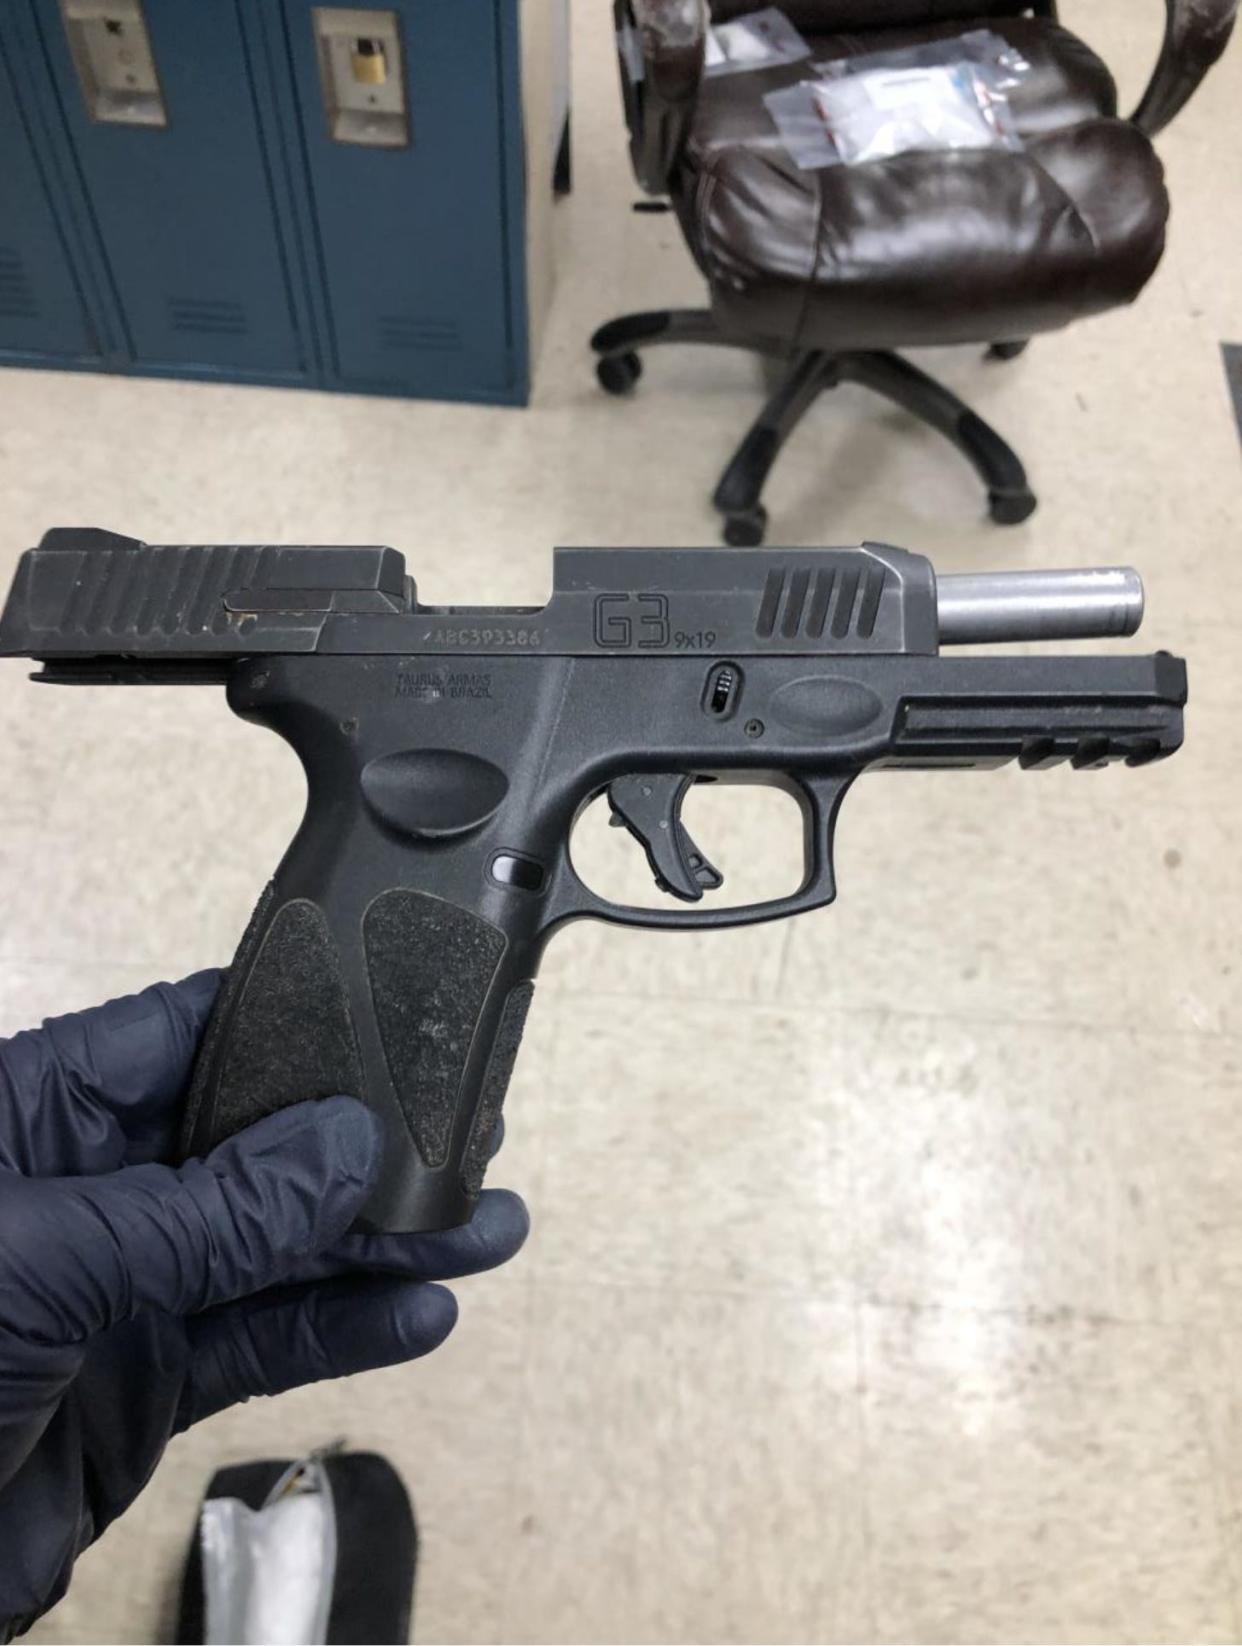 This was one of four handguns seized in a drug bust at a Lawrence convenience store in March.